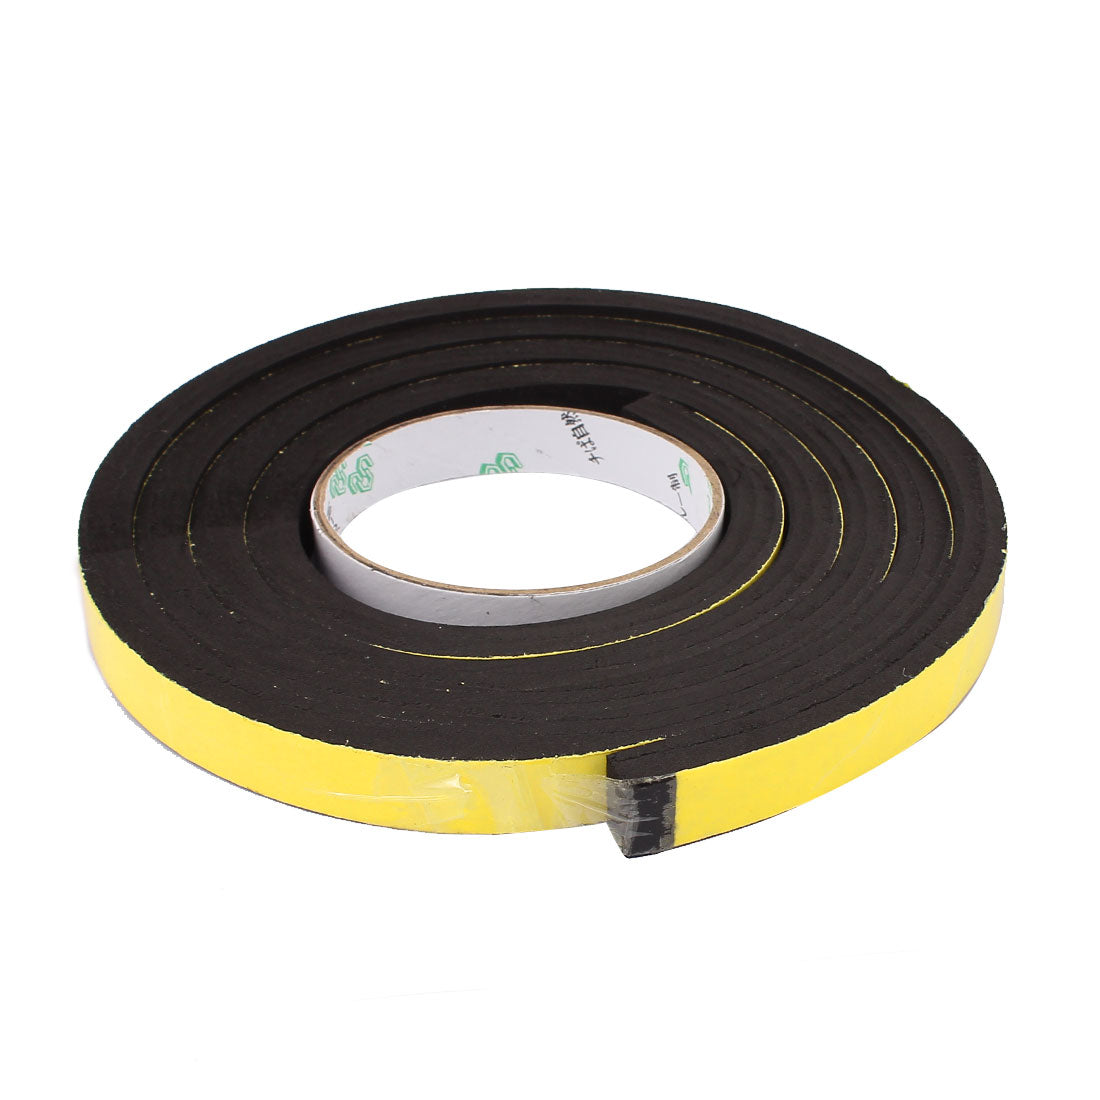 uxcell Uxcell 15mm x 10mm Single Sided Self Adhesive Shockproof Sponge Foam Tape 2M Length